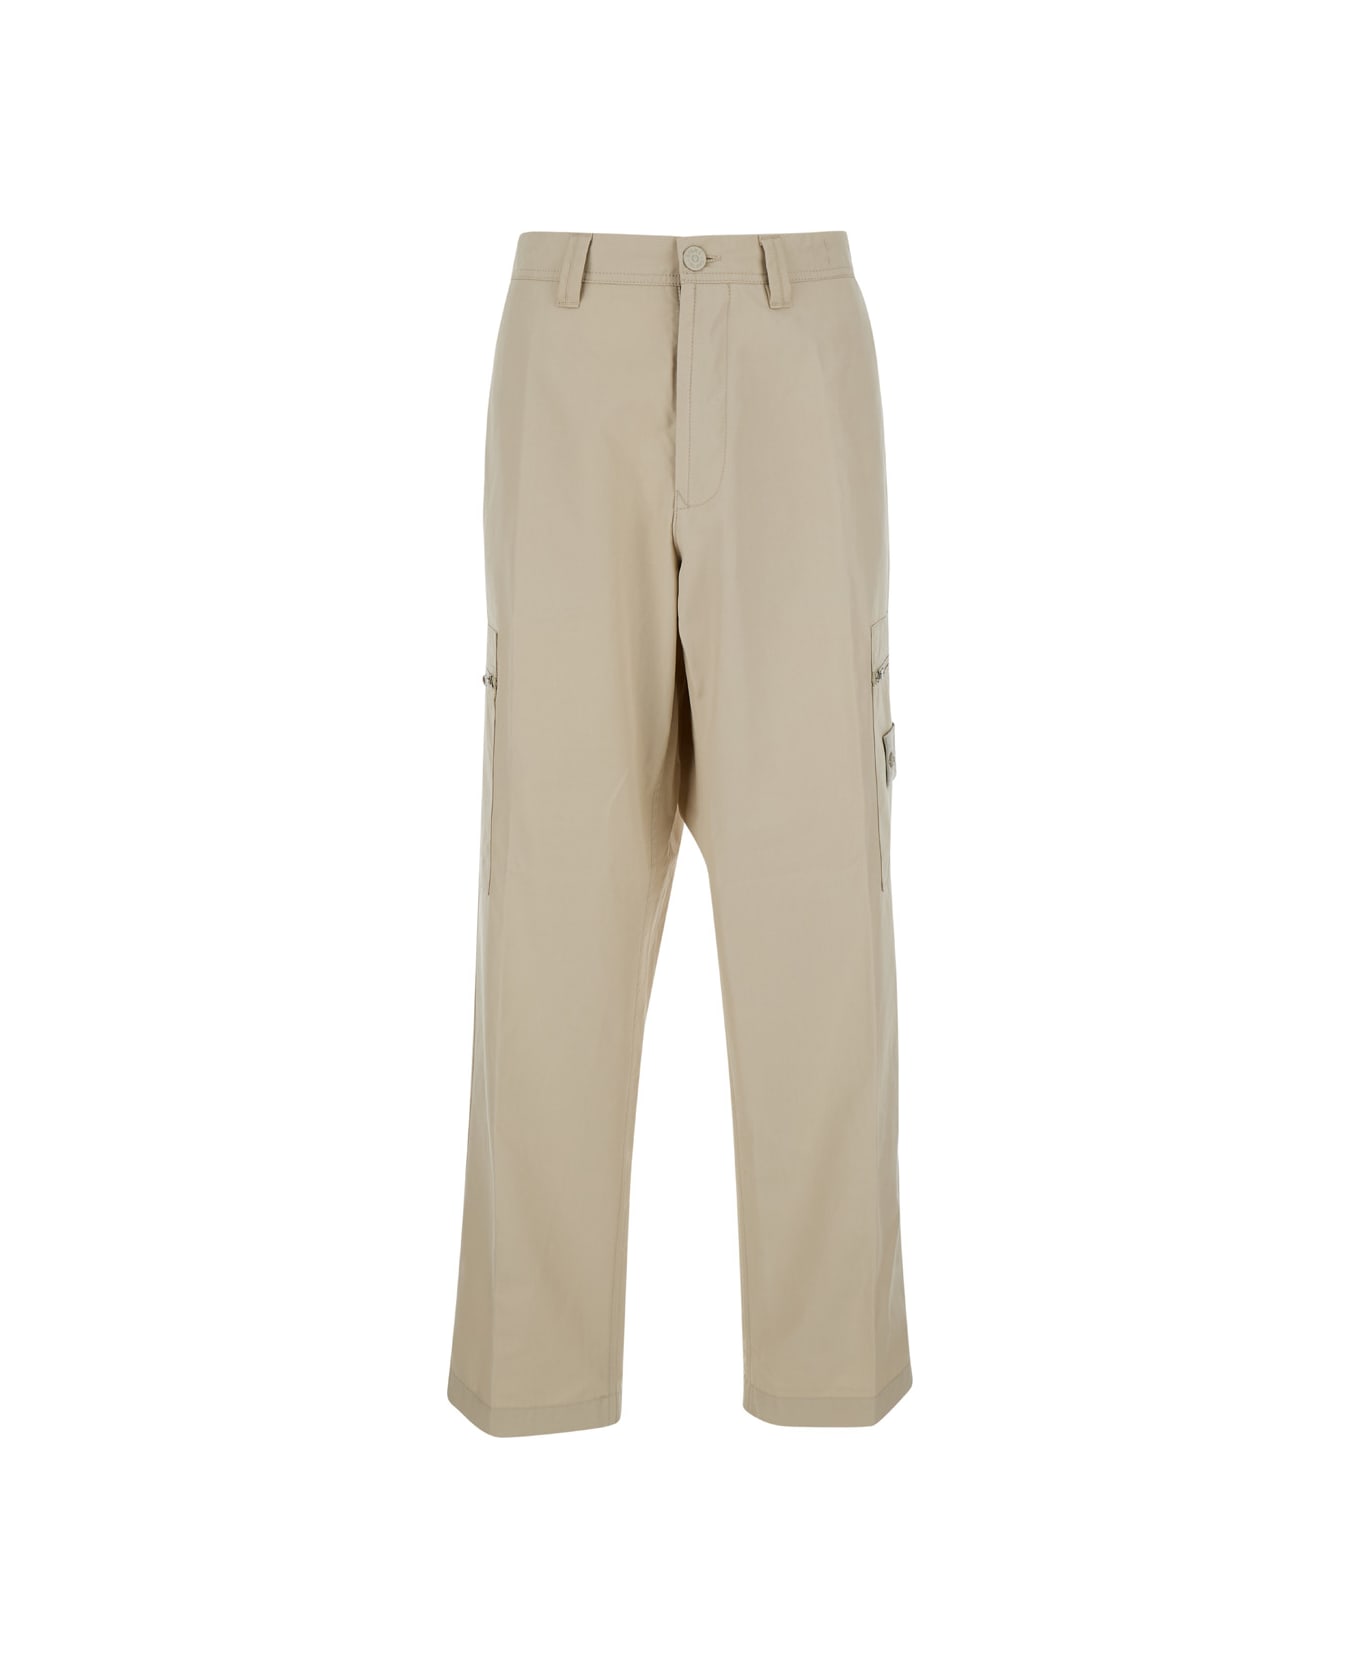 Stone Island Beige Wide Leg Trousers With Compass Logo In Cotton Man - Beige ボトムス